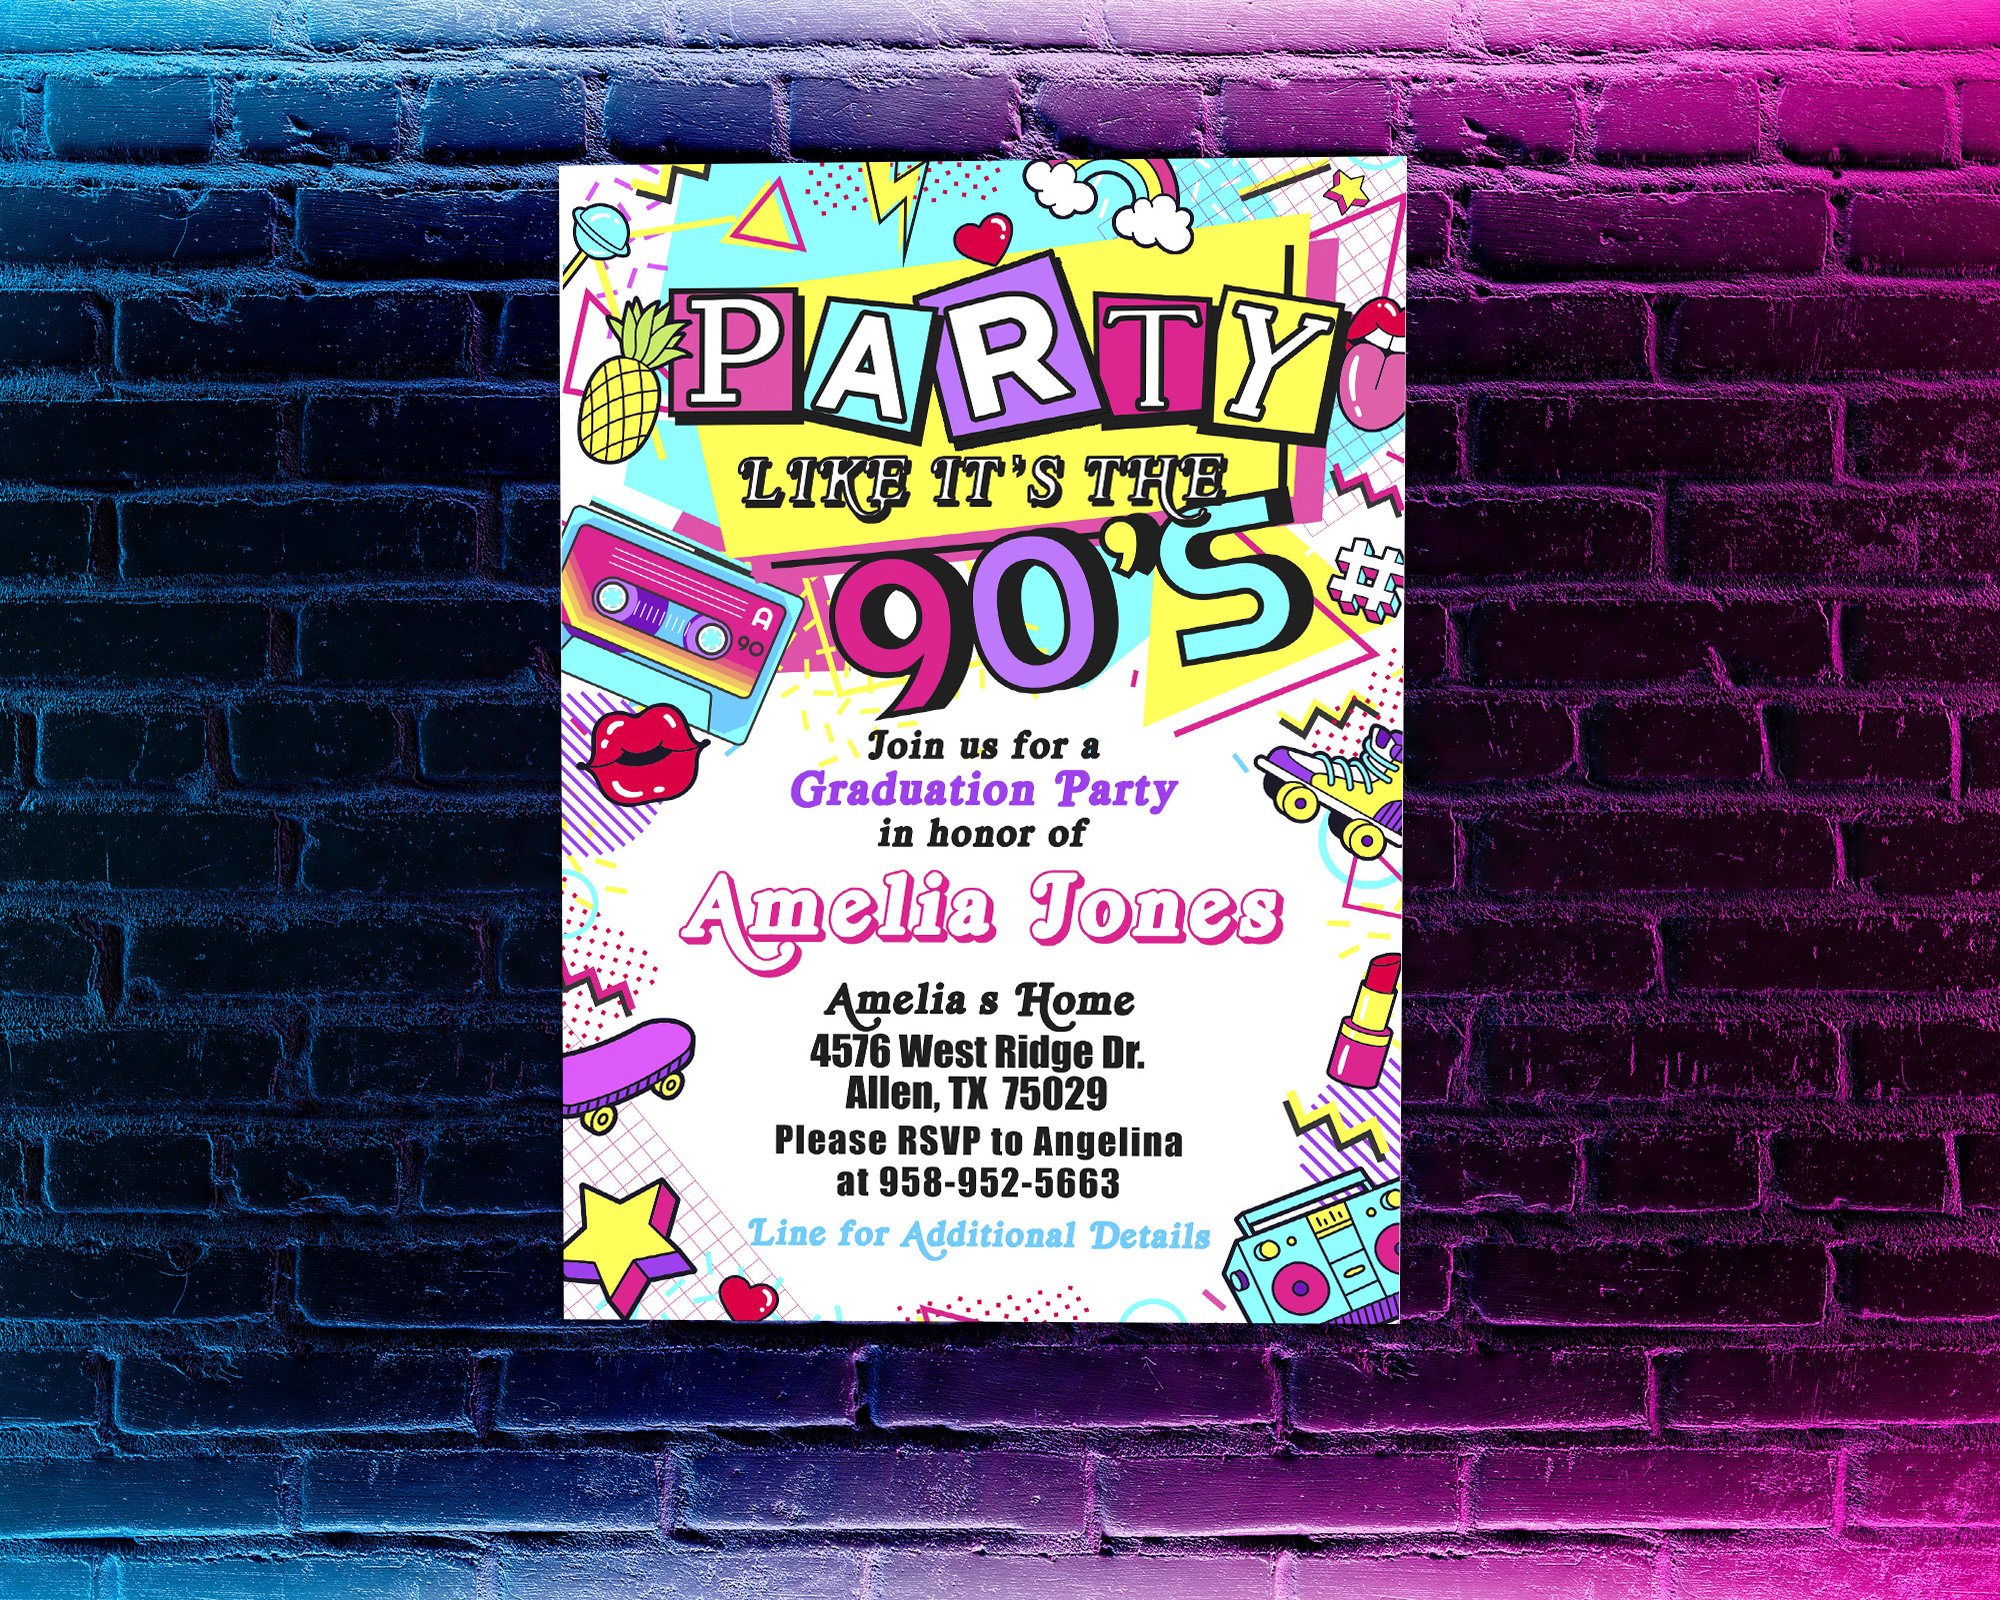 party like its the 90s invitation.jpg